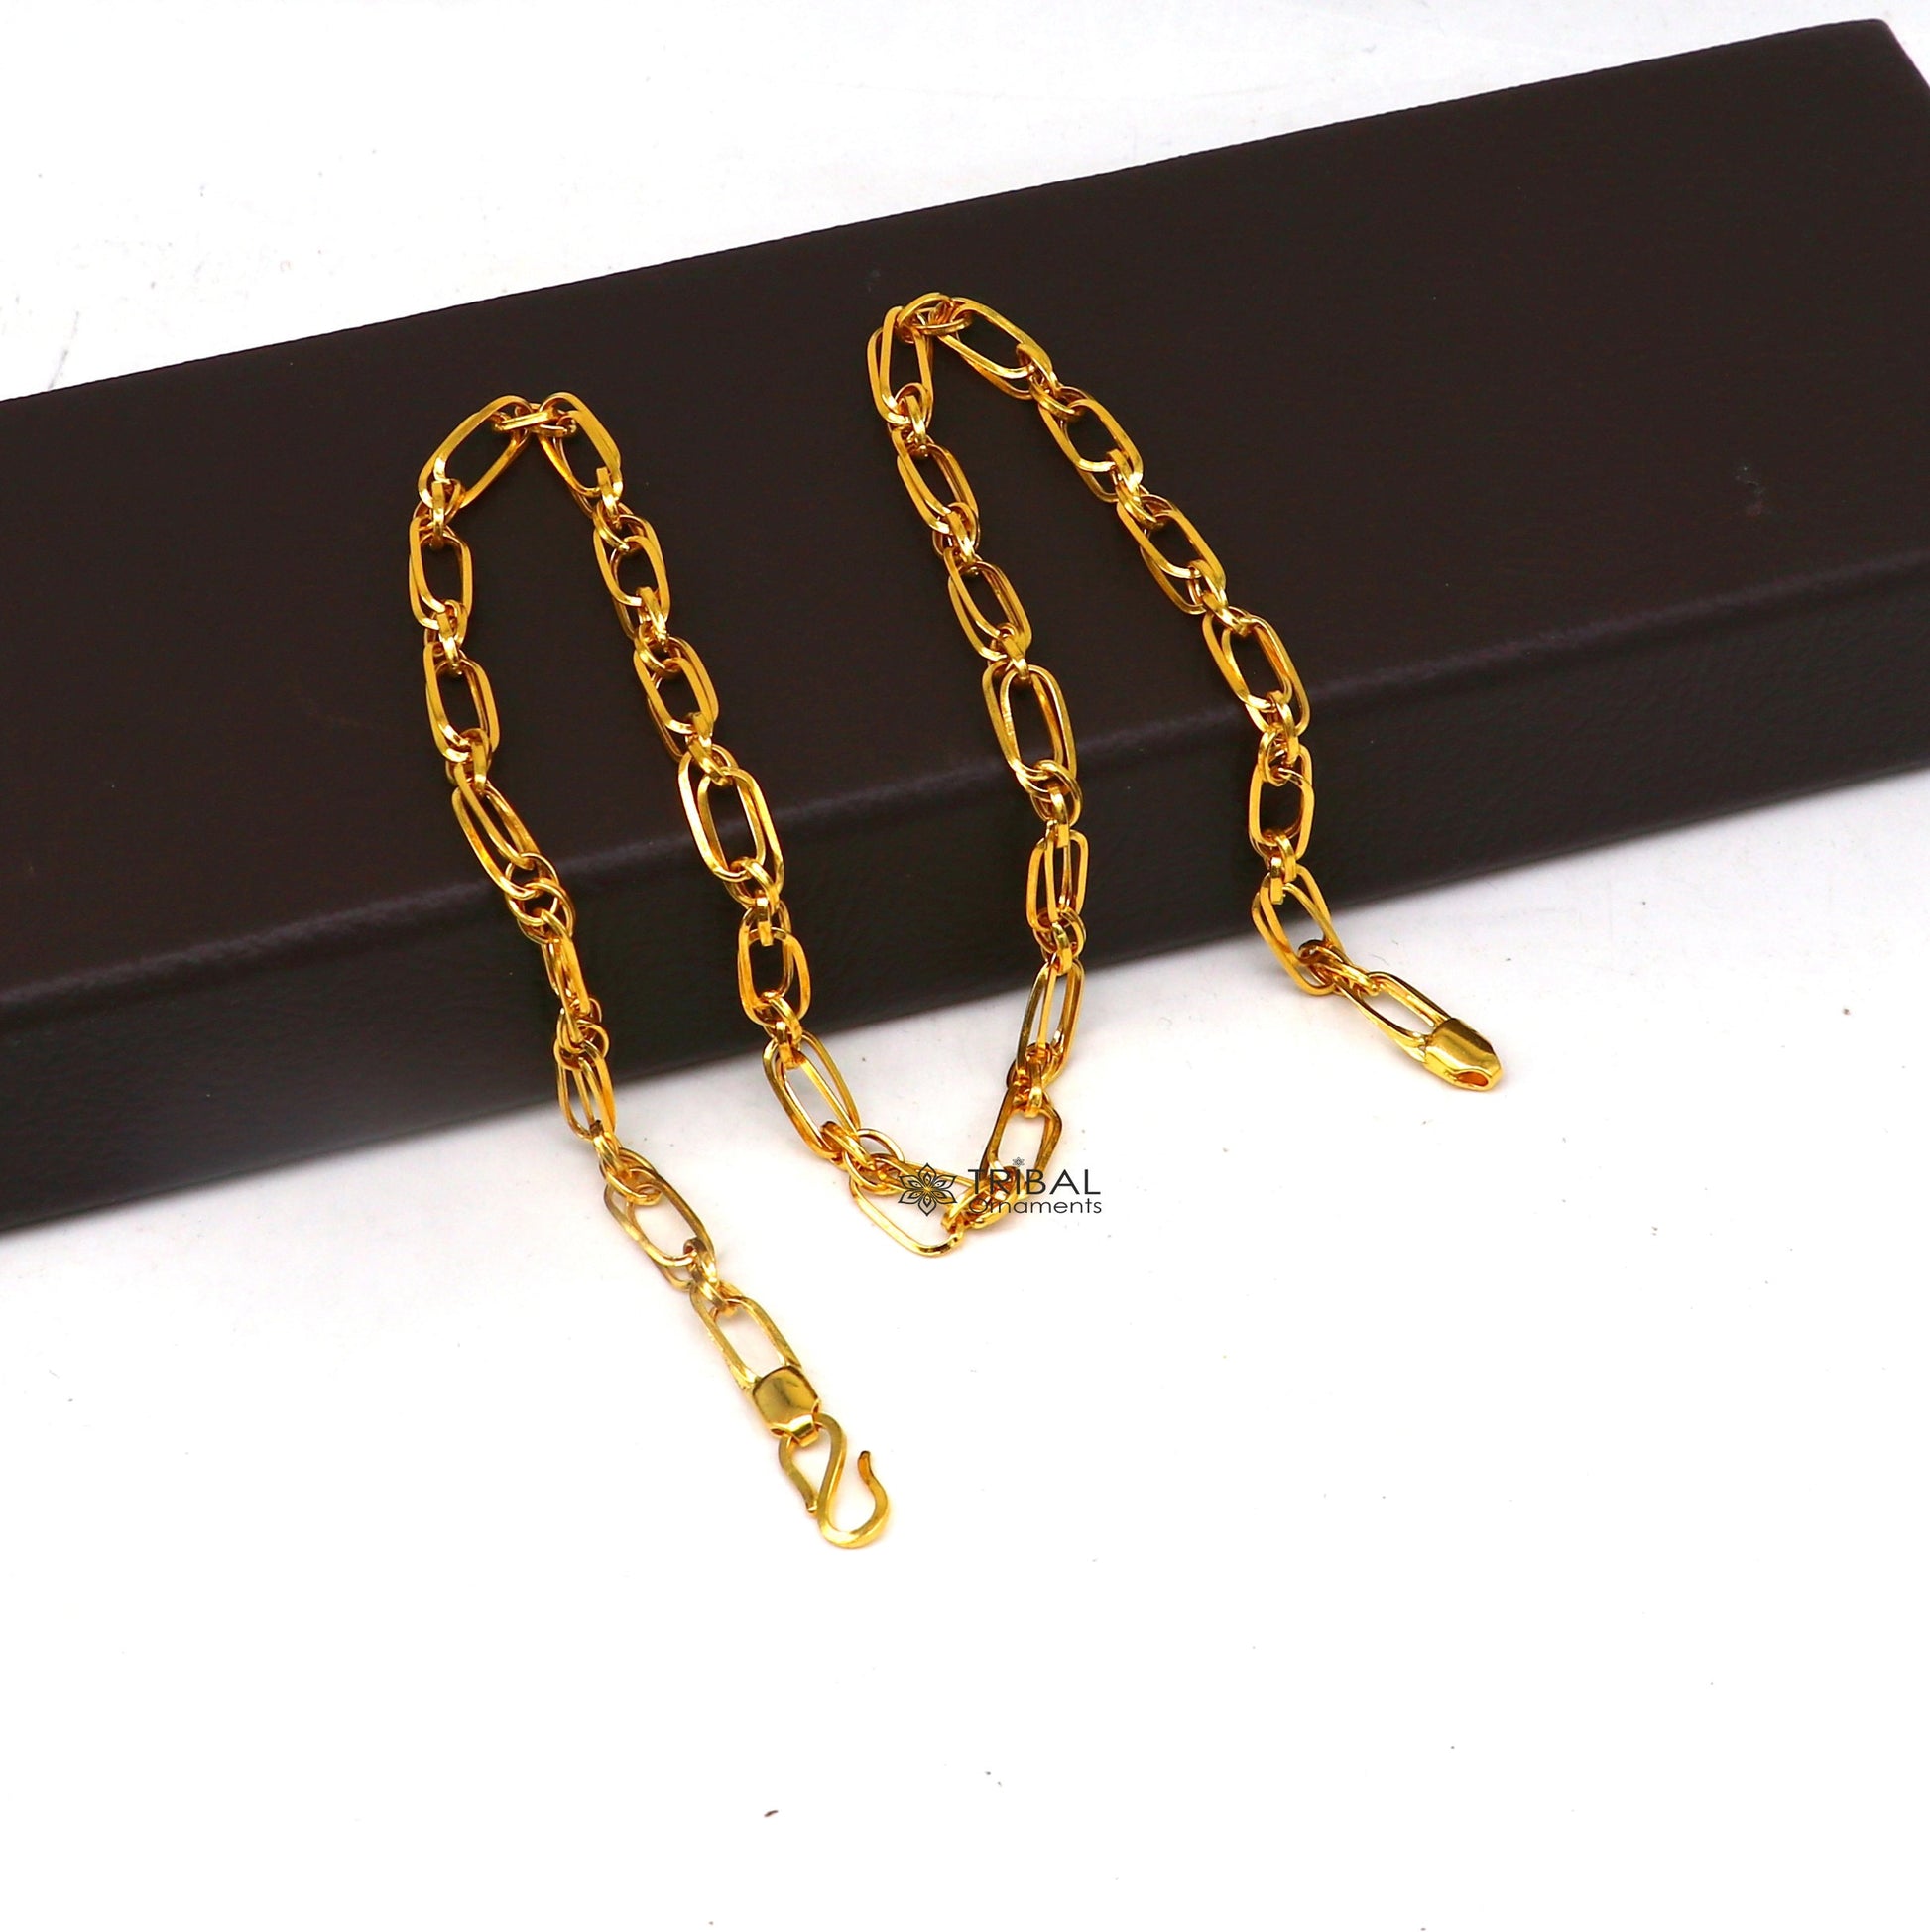 All sizes 22kt yellow gold certified Unisex chain necklace, best gifting customized indo link chain necklace fancy stylish jewelry ch572 - TRIBAL ORNAMENTS